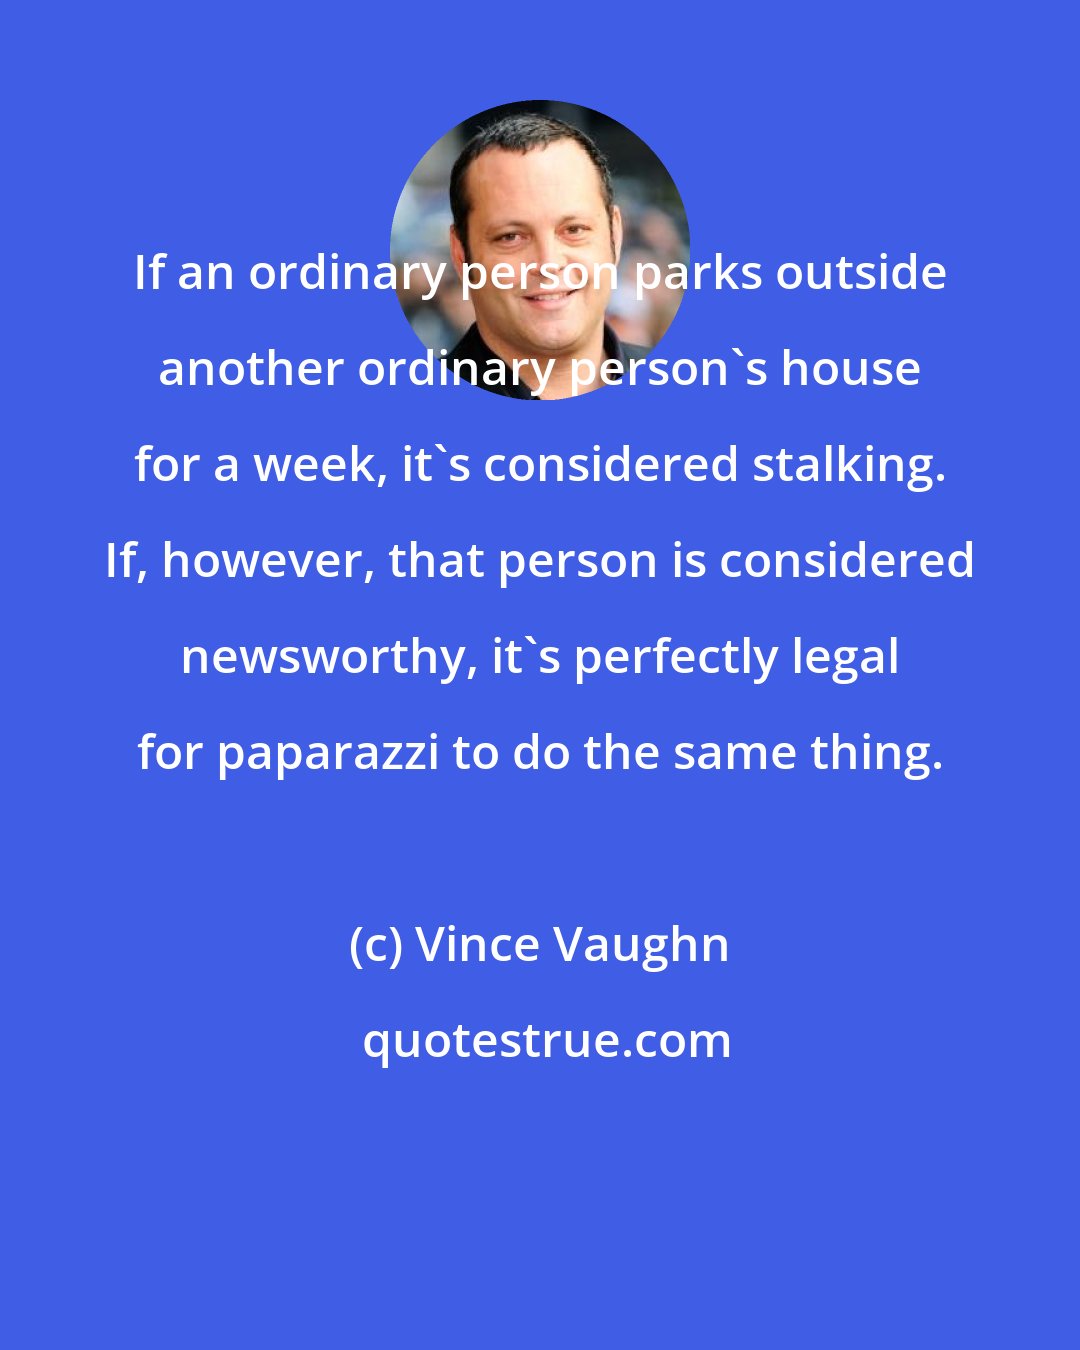 Vince Vaughn: If an ordinary person parks outside another ordinary person's house for a week, it's considered stalking. If, however, that person is considered newsworthy, it's perfectly legal for paparazzi to do the same thing.